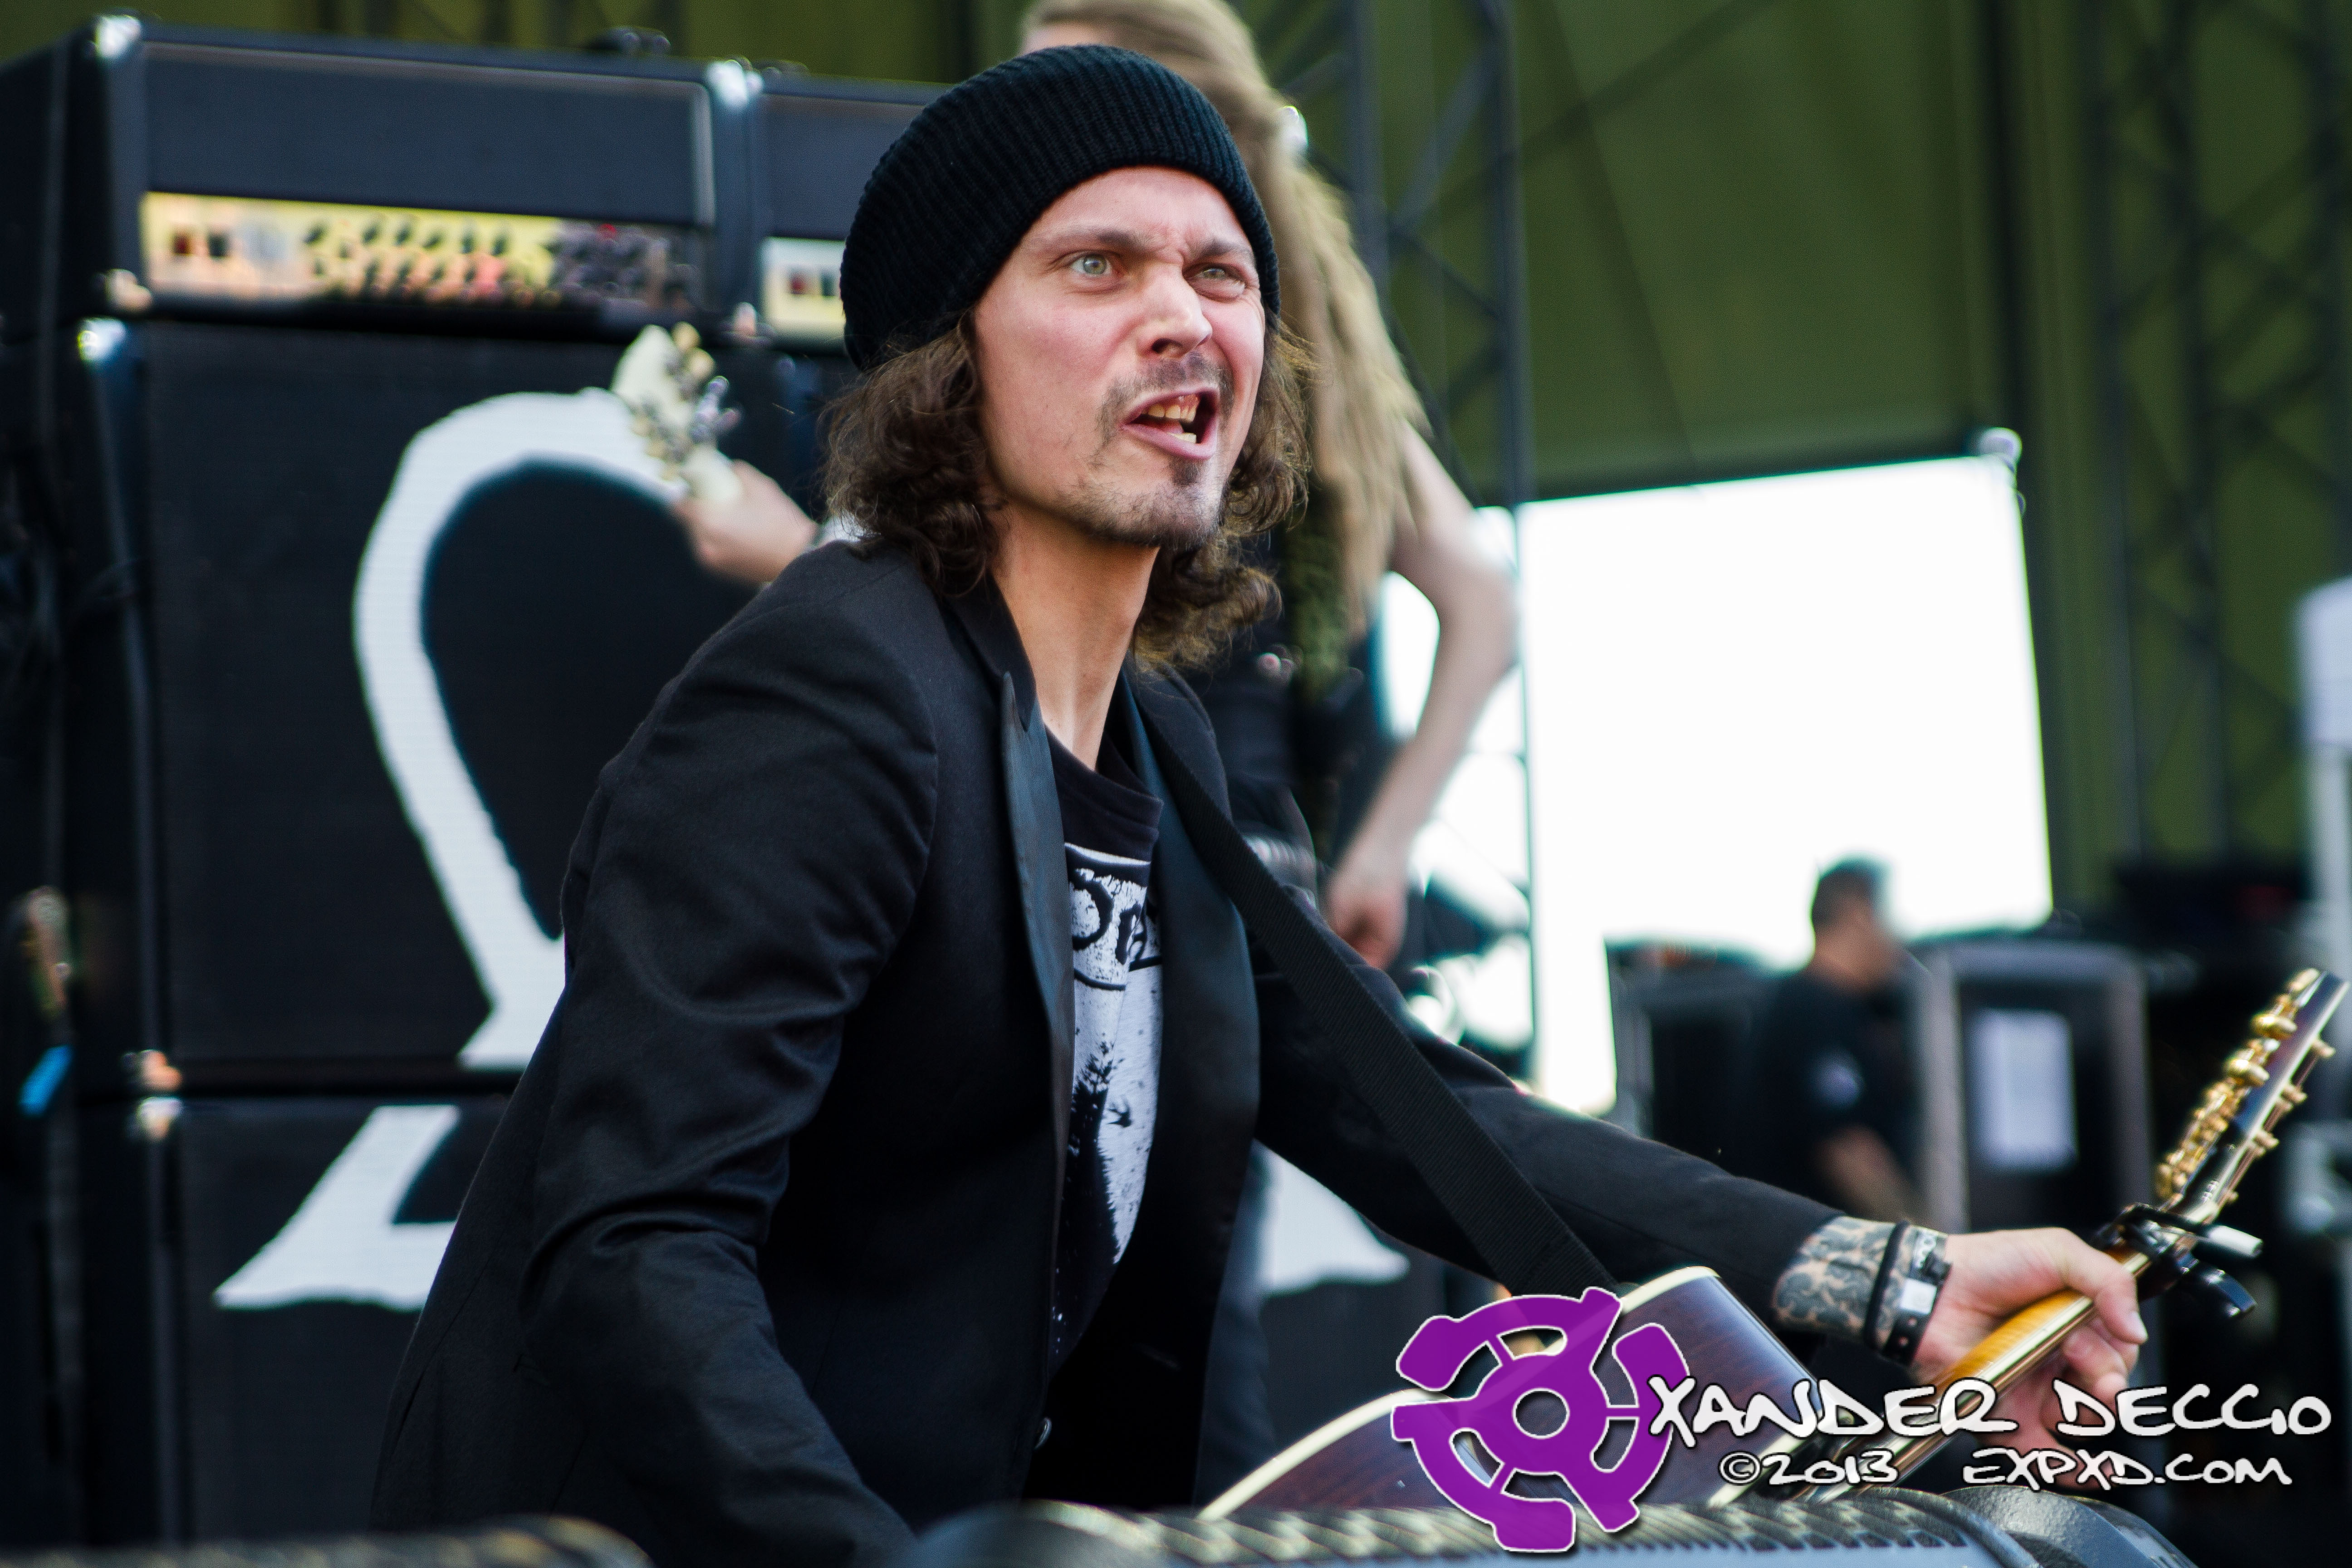 KISW Pain in the Grass 2013: HIM (Photo by Xander Deccio)